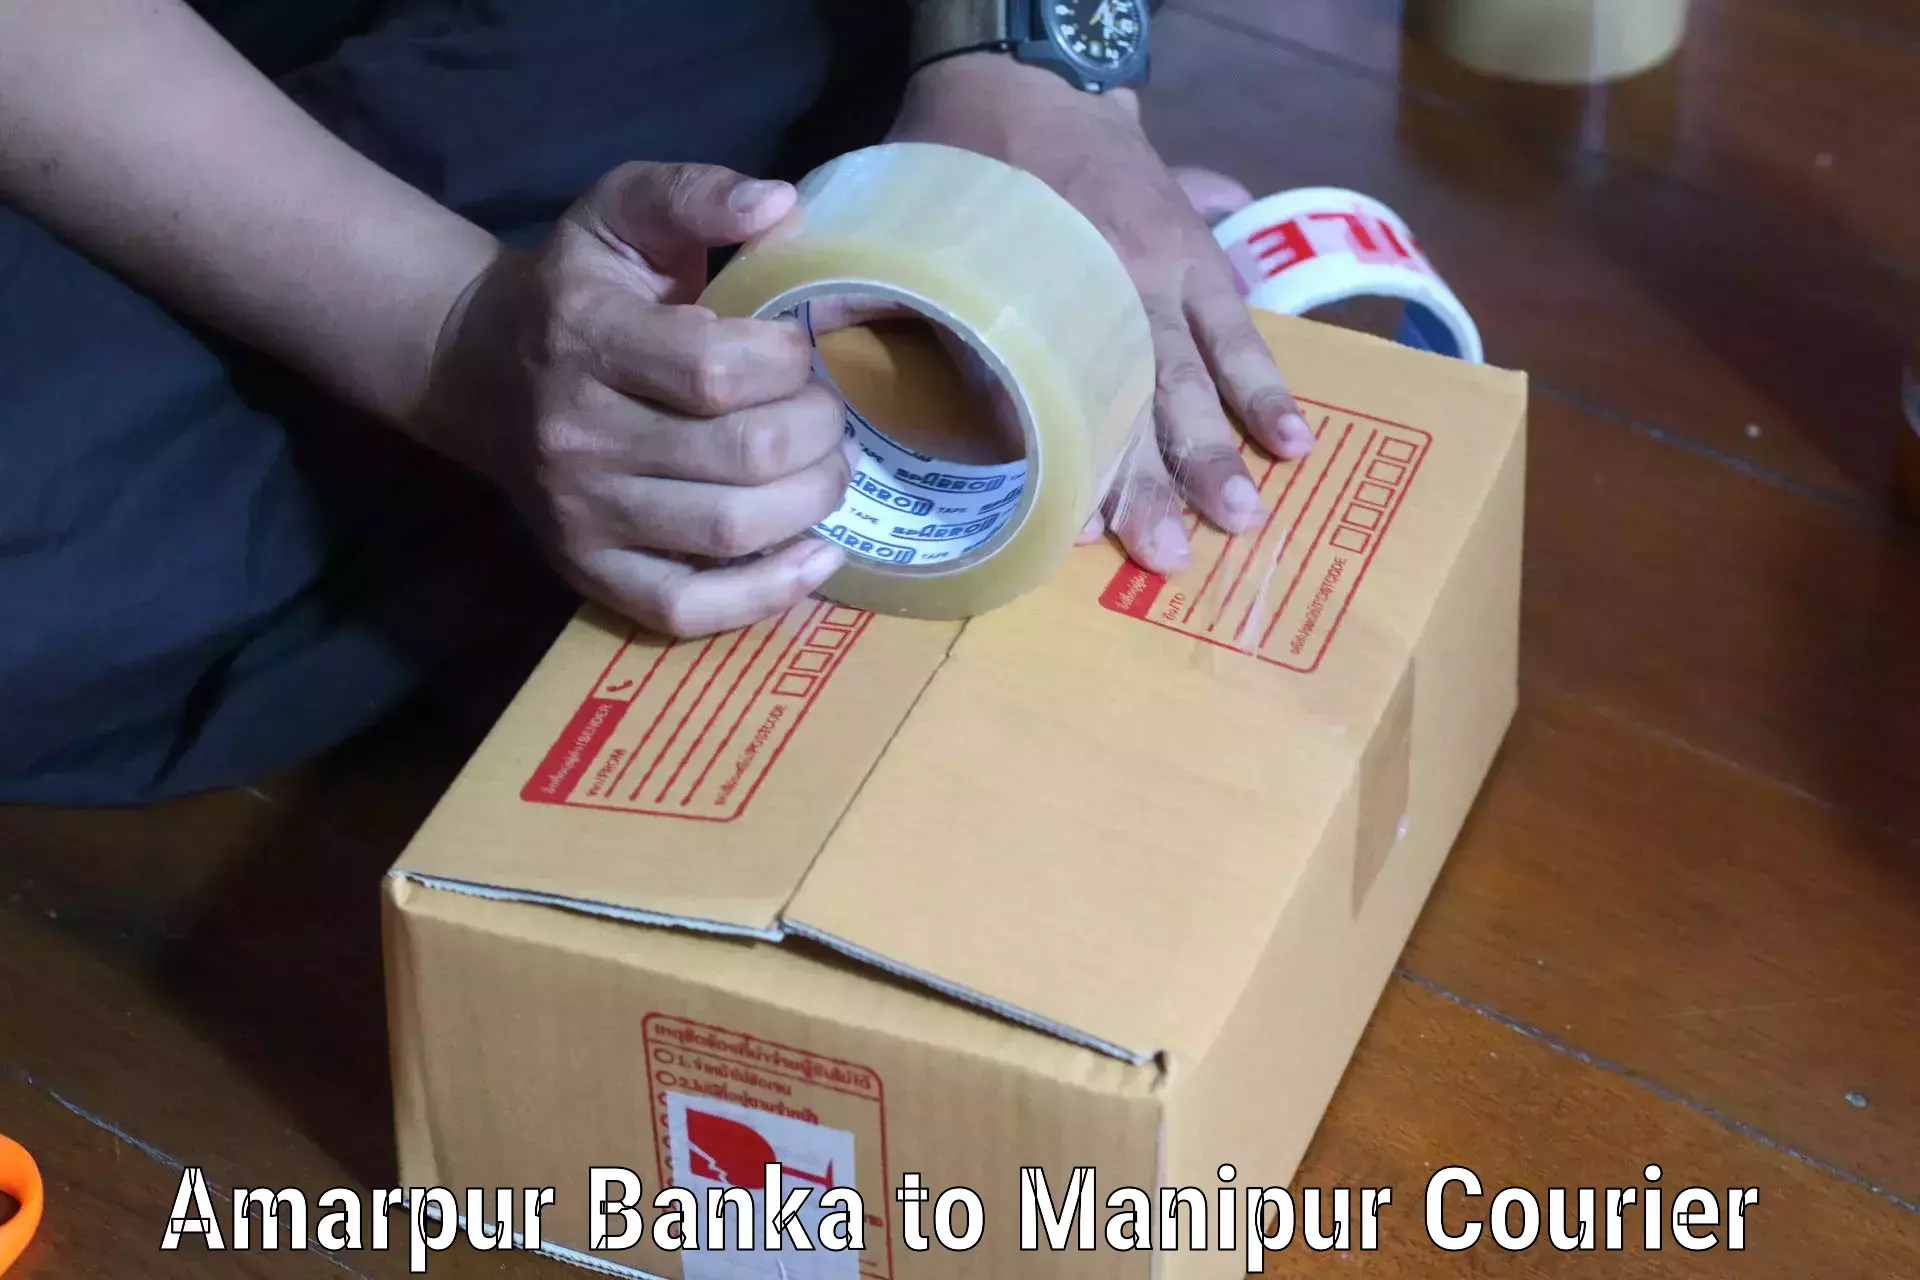 Automated parcel services Amarpur Banka to Imphal